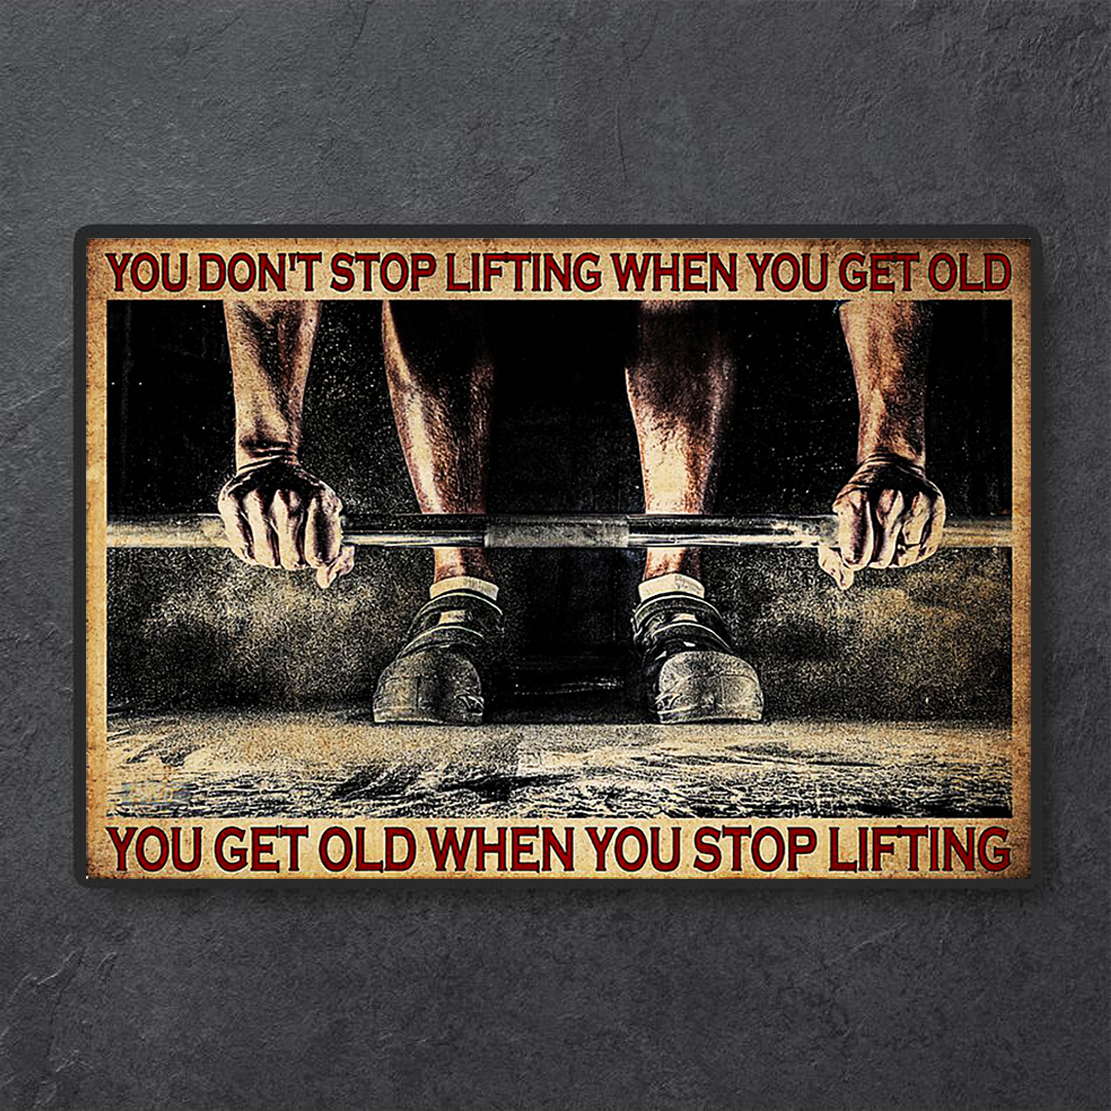 Fitness You don't stop lifting when you get old poster